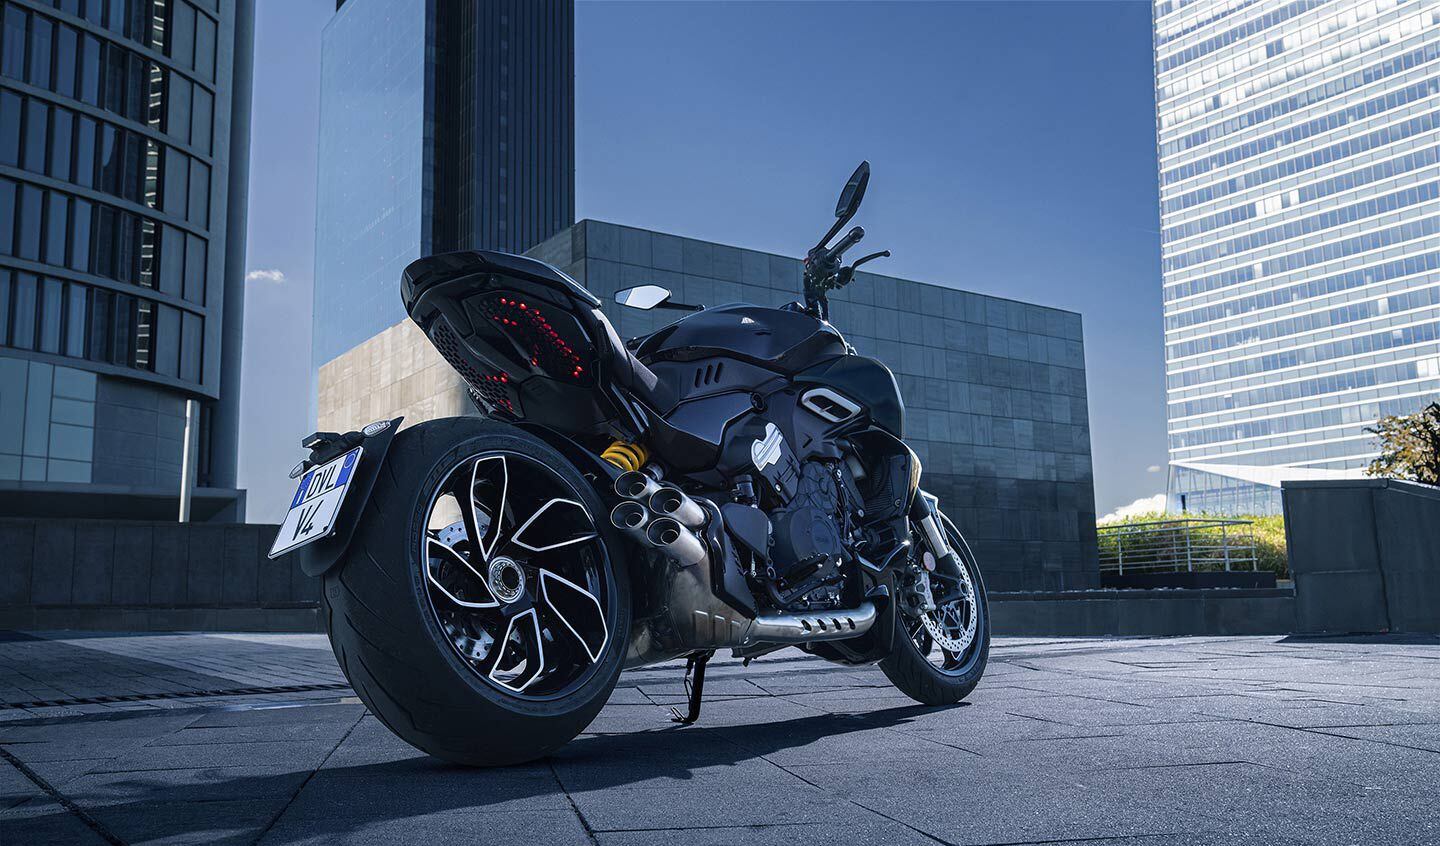 The Diavel V4 in black. Even with a large catalytic converter, the quad-tip exhaust is eye-catching.